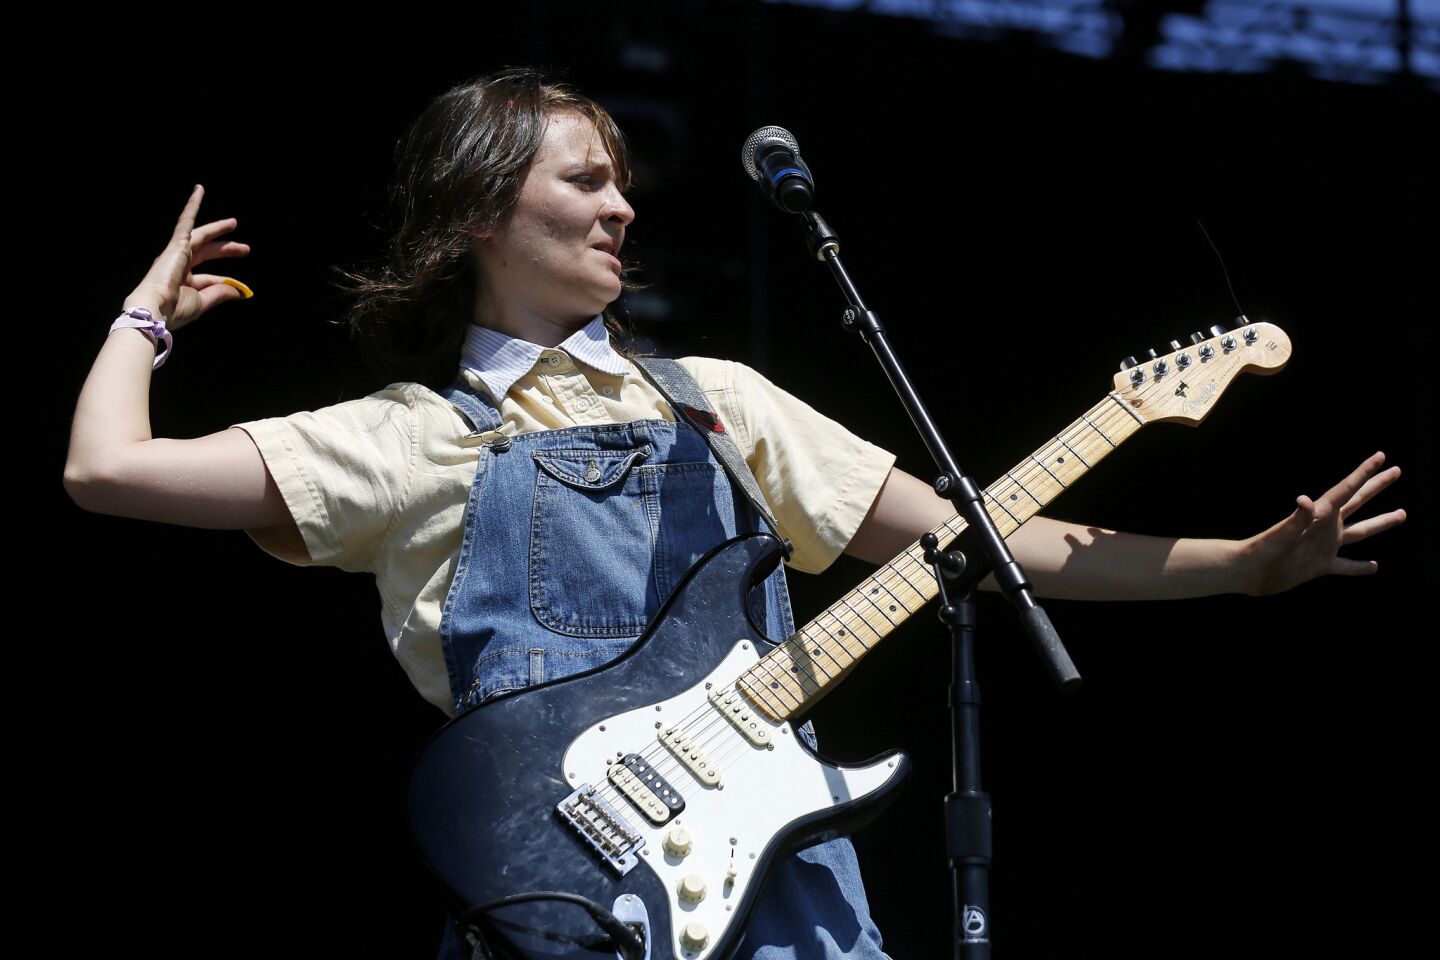 Clementine Creevy of Cherry Glazerr performs Sunday at FYF Fest in Exposition Park.